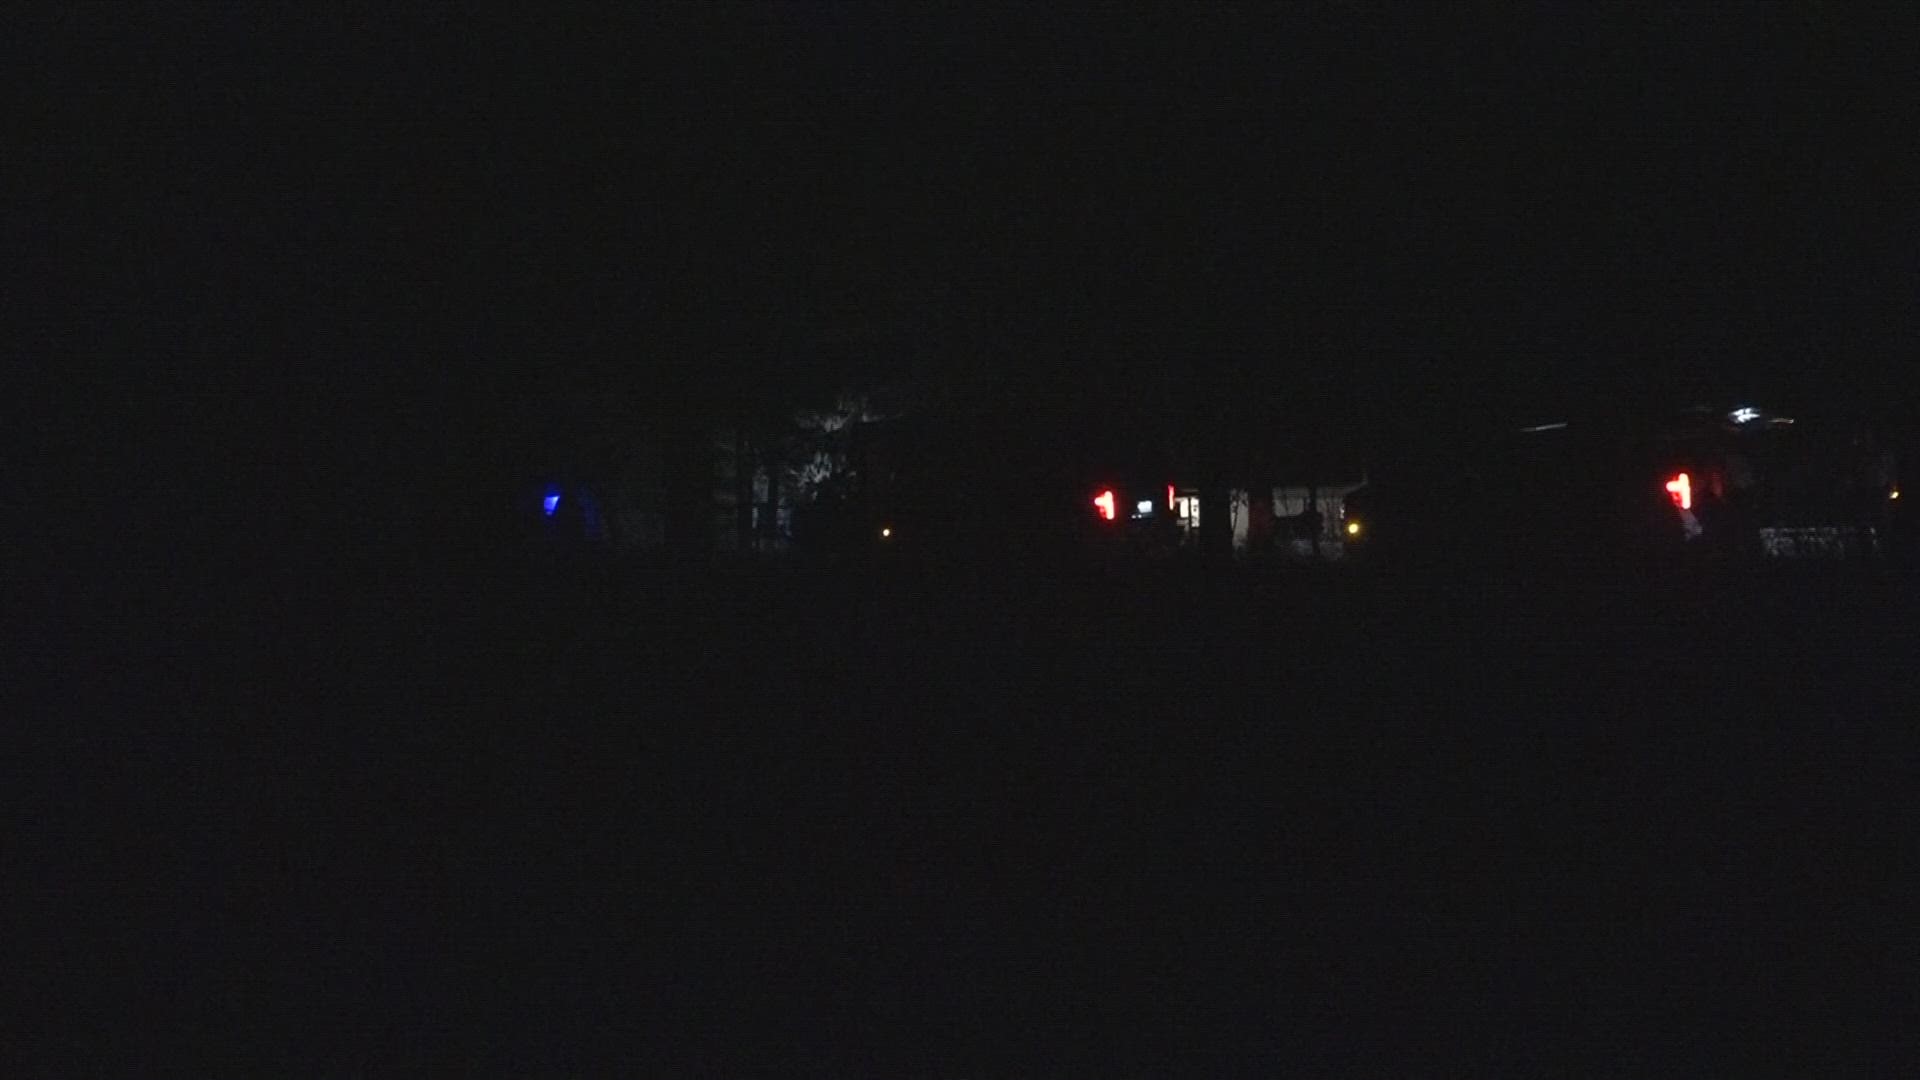 The SWAT team was called to assist in the situation after an individual barricaded himself in a rear bedroom with firearms.